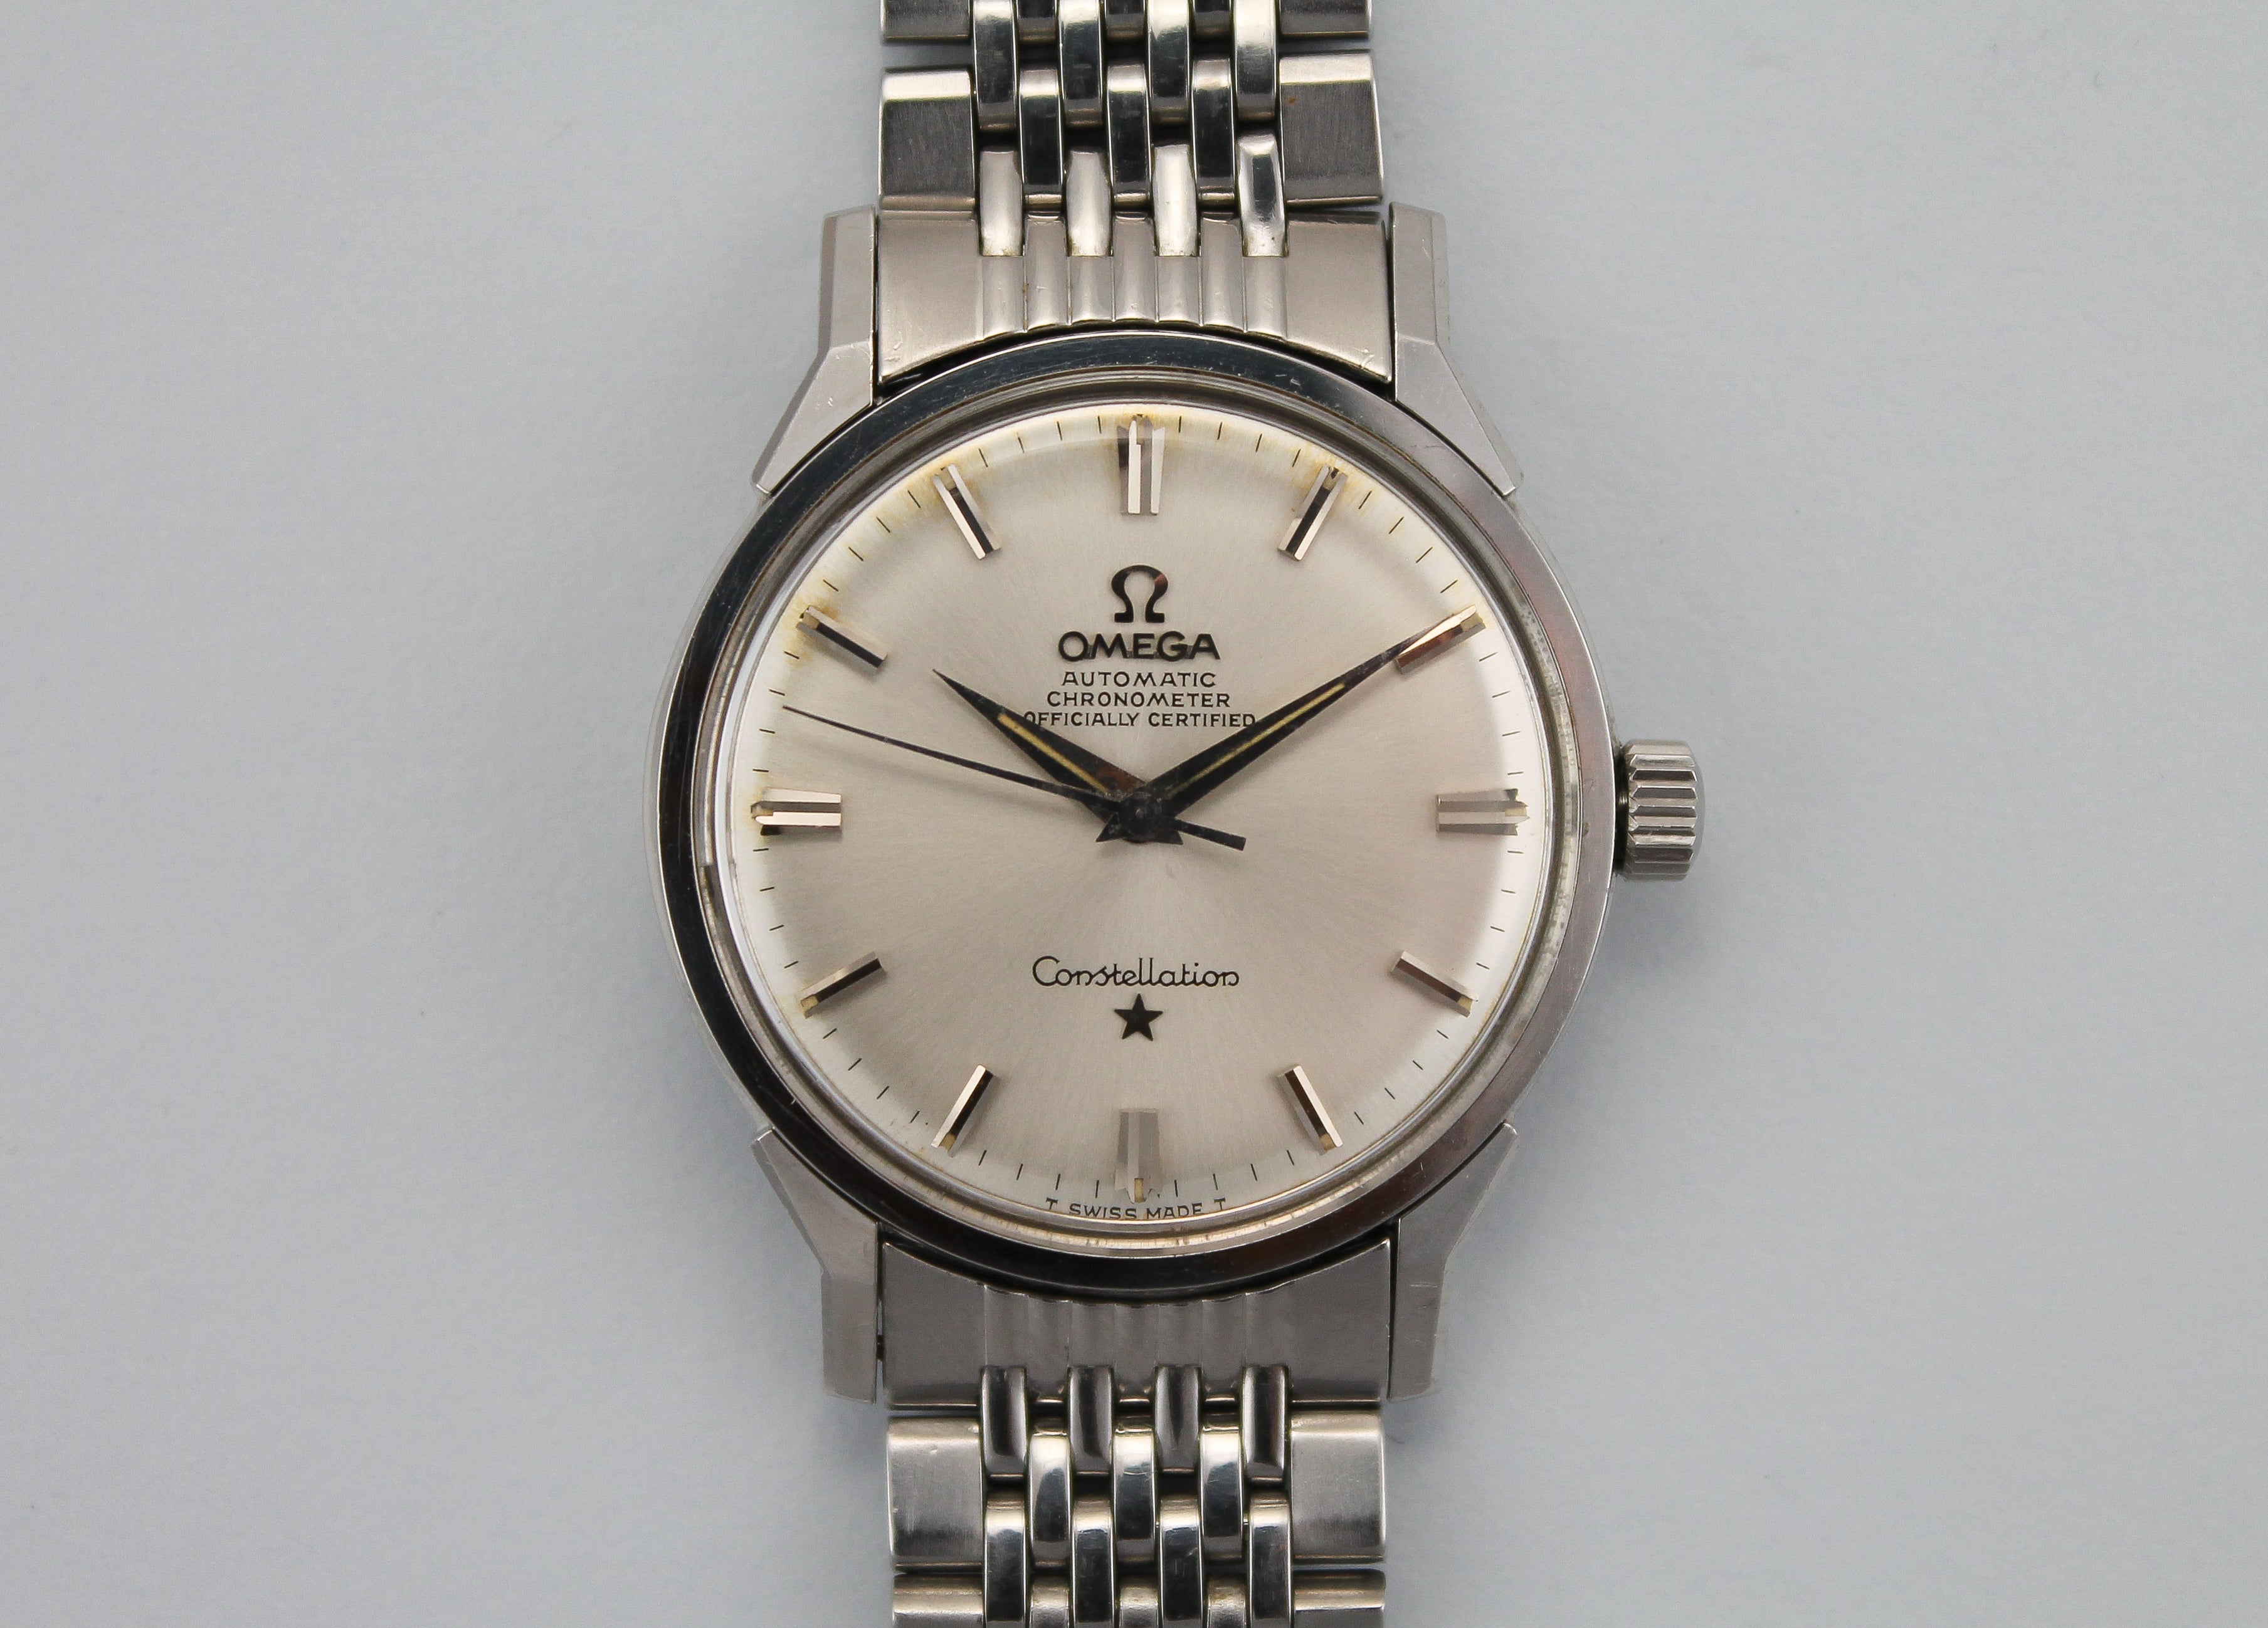 OMEGA Constellation Automatic ref 167.005 Cal 551 (1966)